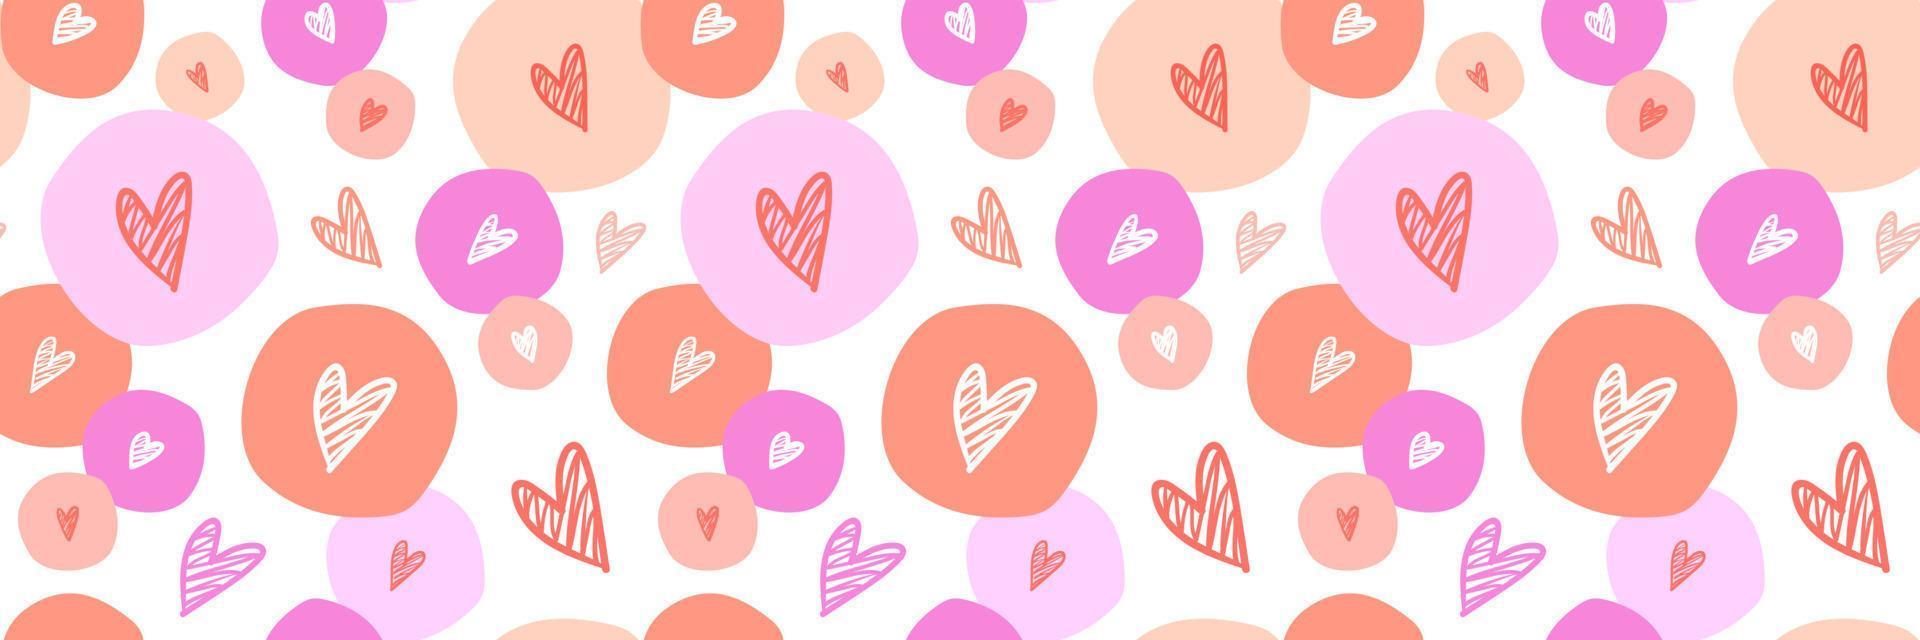 Colorful circles with hand drawn Hearts seamless pattern. Girlish design fashion print. Valentines Day wallpaper. Vector illustration.